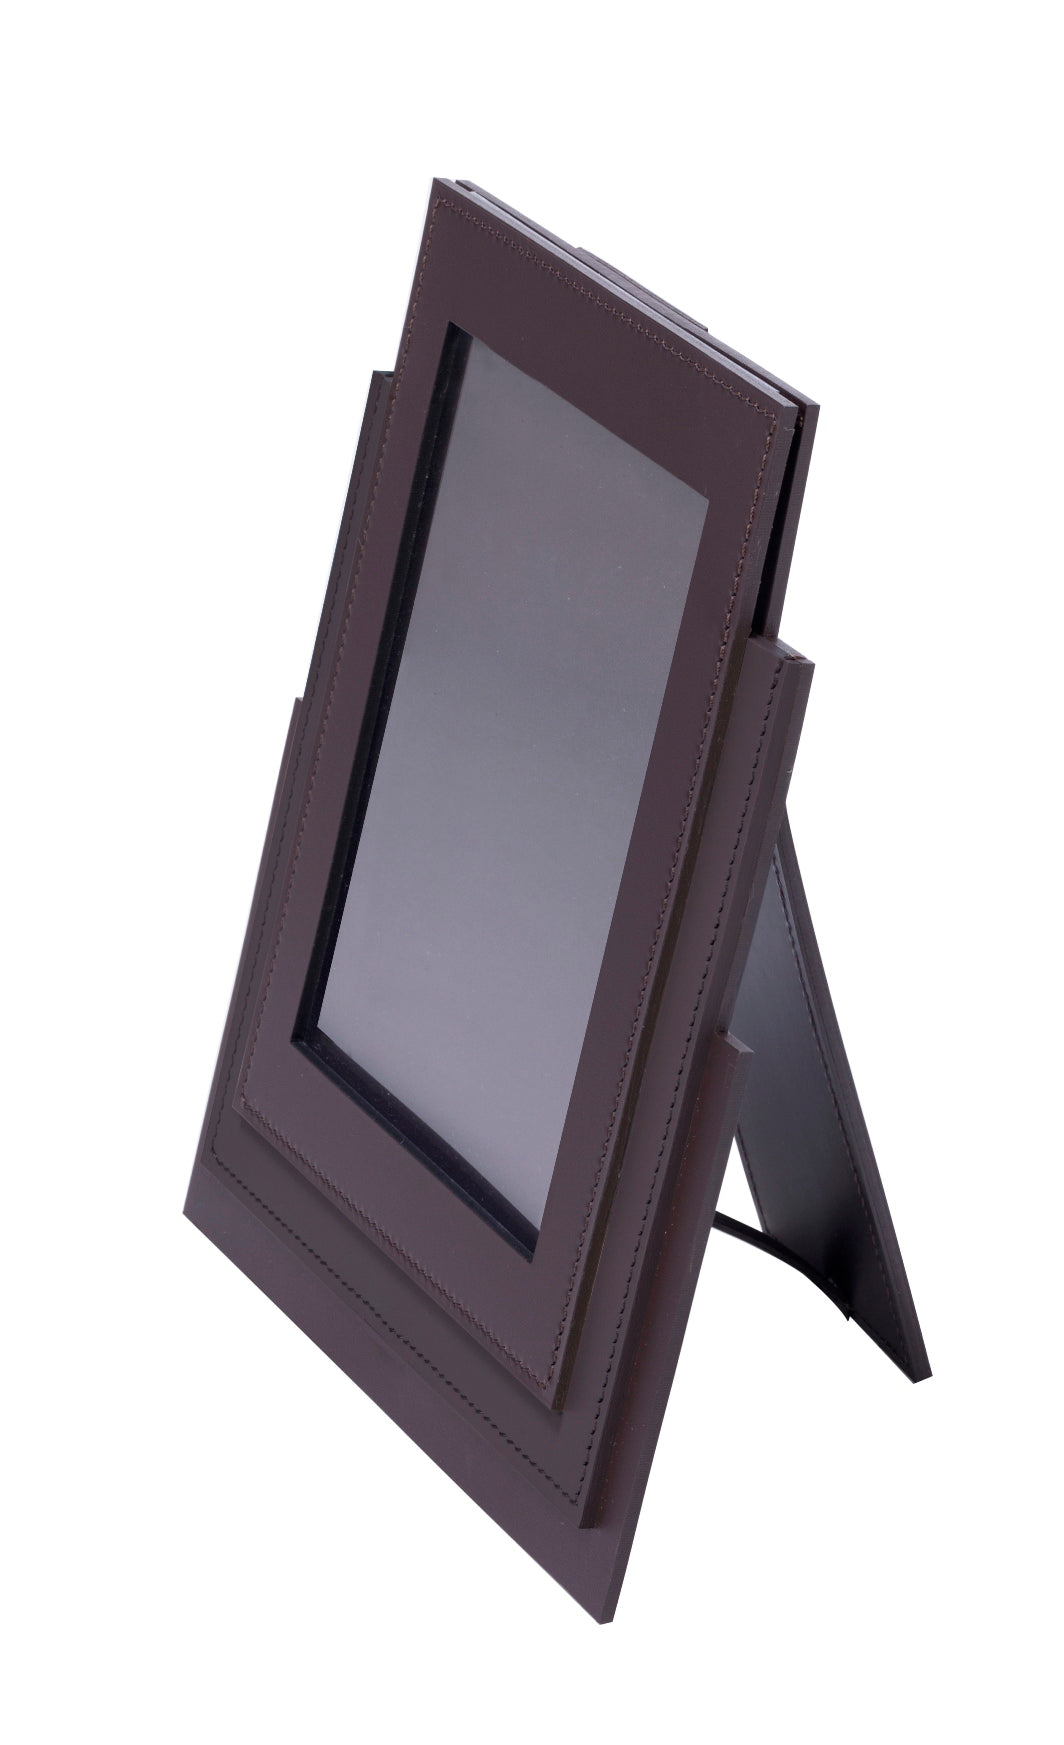 RUDI Broadway Picture Frame | Luxury photo frames & photo alums | 2Jour Concierge, #1 luxury high-end gift & lifestyle shop